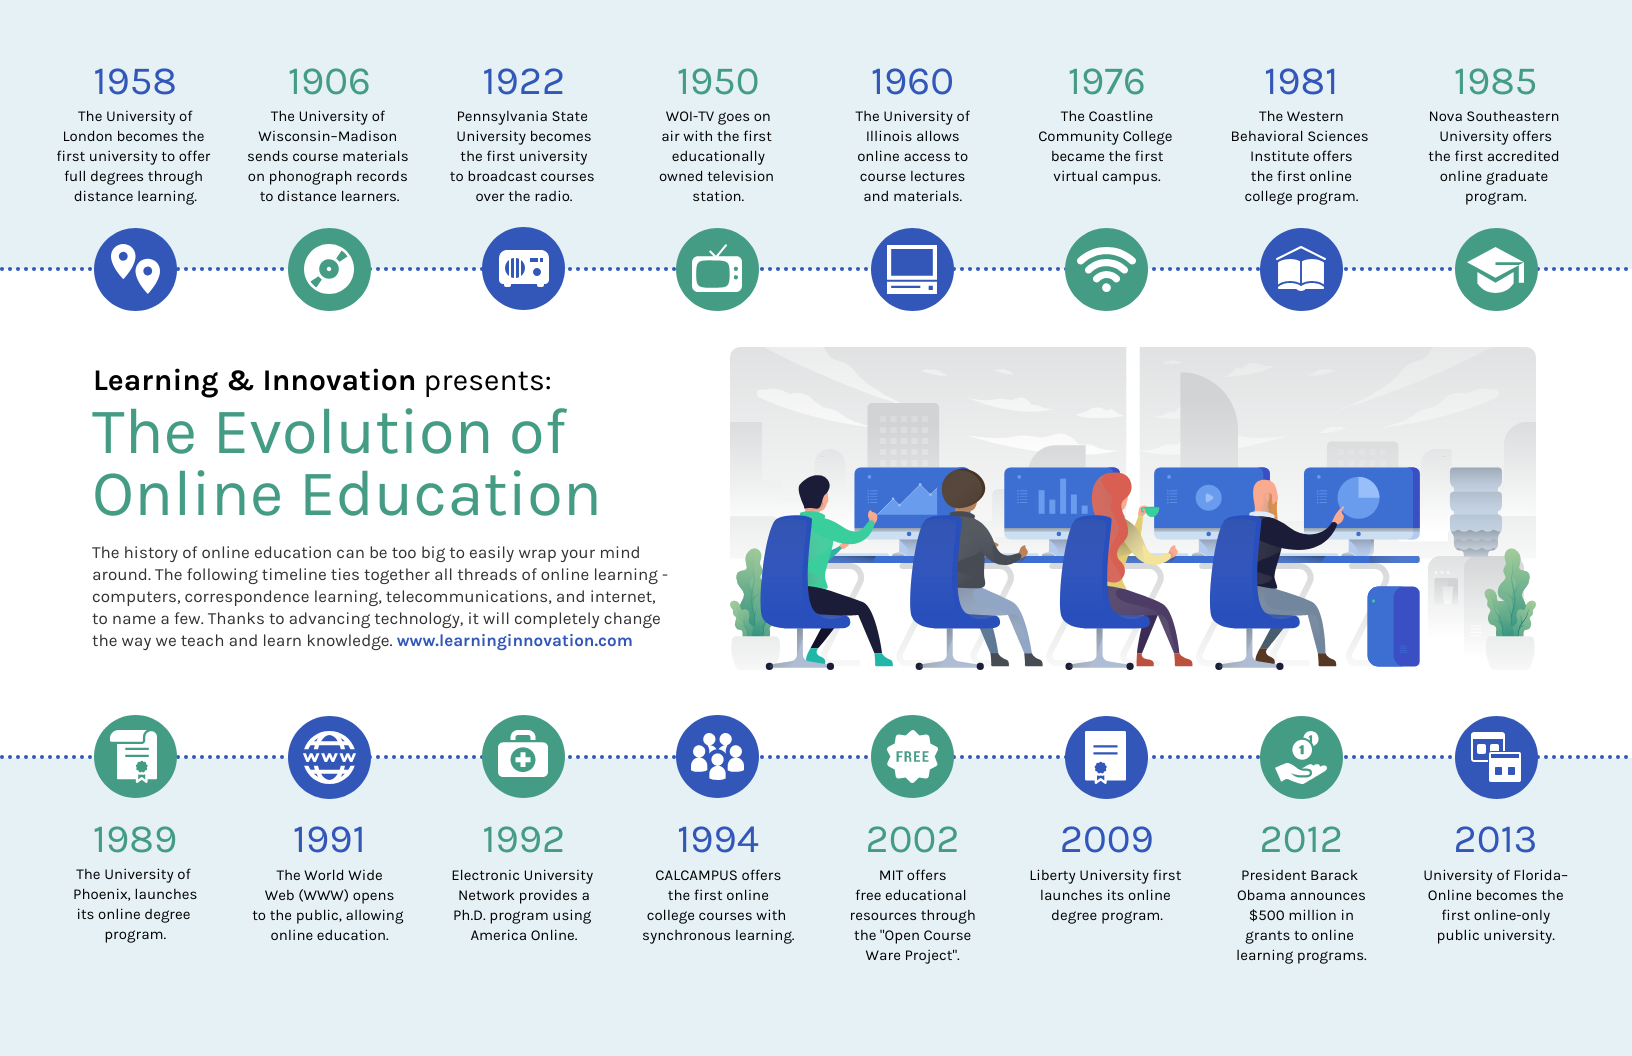 An infographic titled 'The Evolution of Online Education' presented by Learning & Innovation, depicting key milestones from 1958 to 2013. It illustrates the historical progression of distance learning, starting from the University of London offering the first distance learning degree, through the development of various online platforms and technologies, to the proliferation of massive open online courses and online degrees by public universities. Icons representing communication, technology, and the internet accompany each historical entry to visualize the transition to digital education.